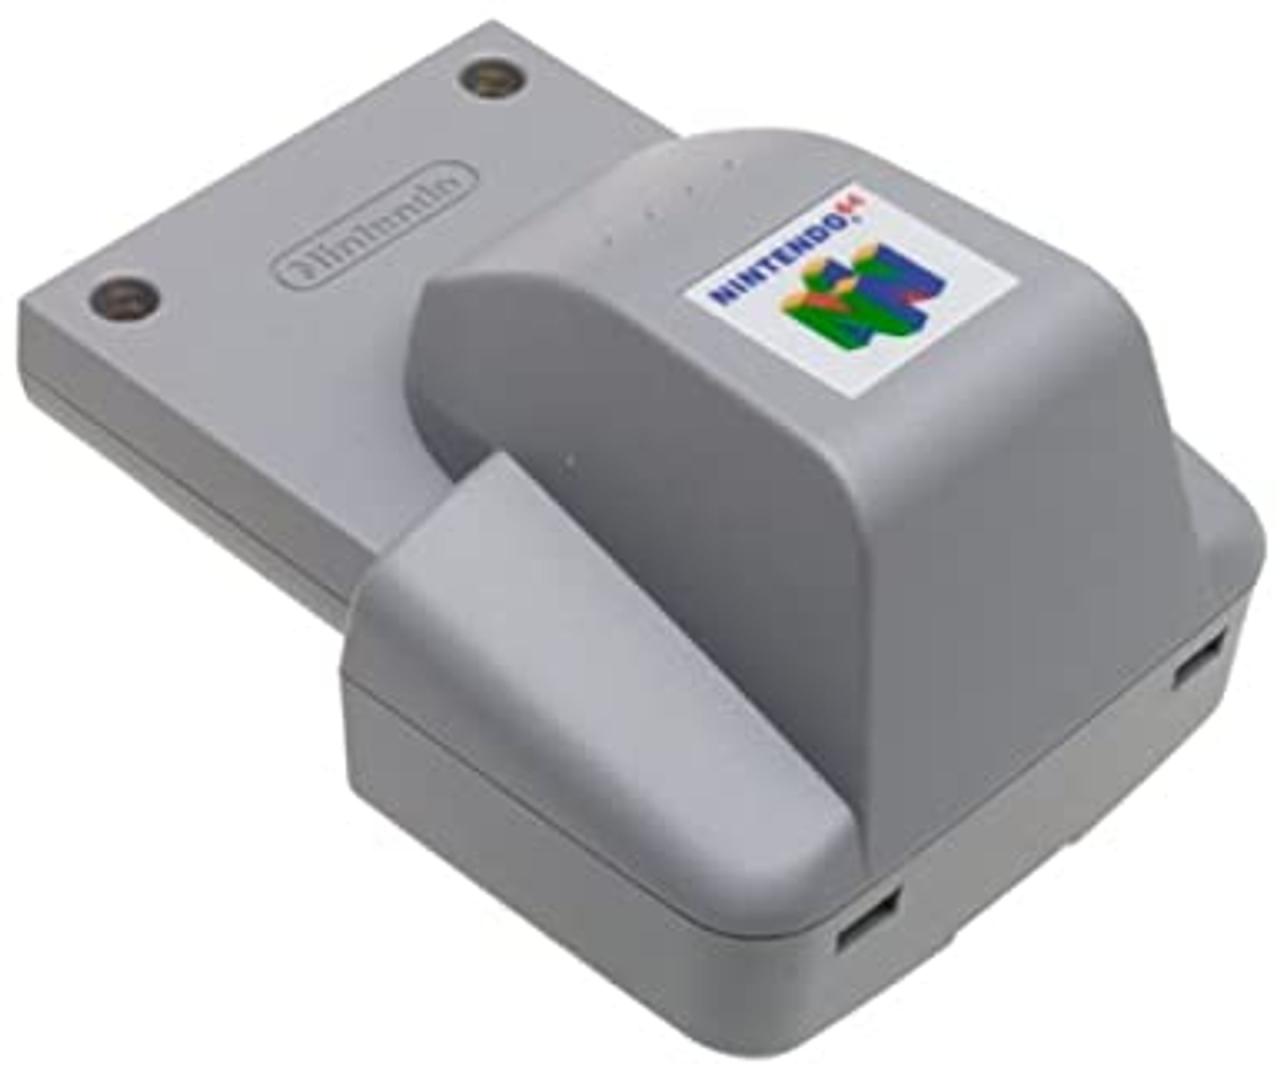 Rumble pack for n64